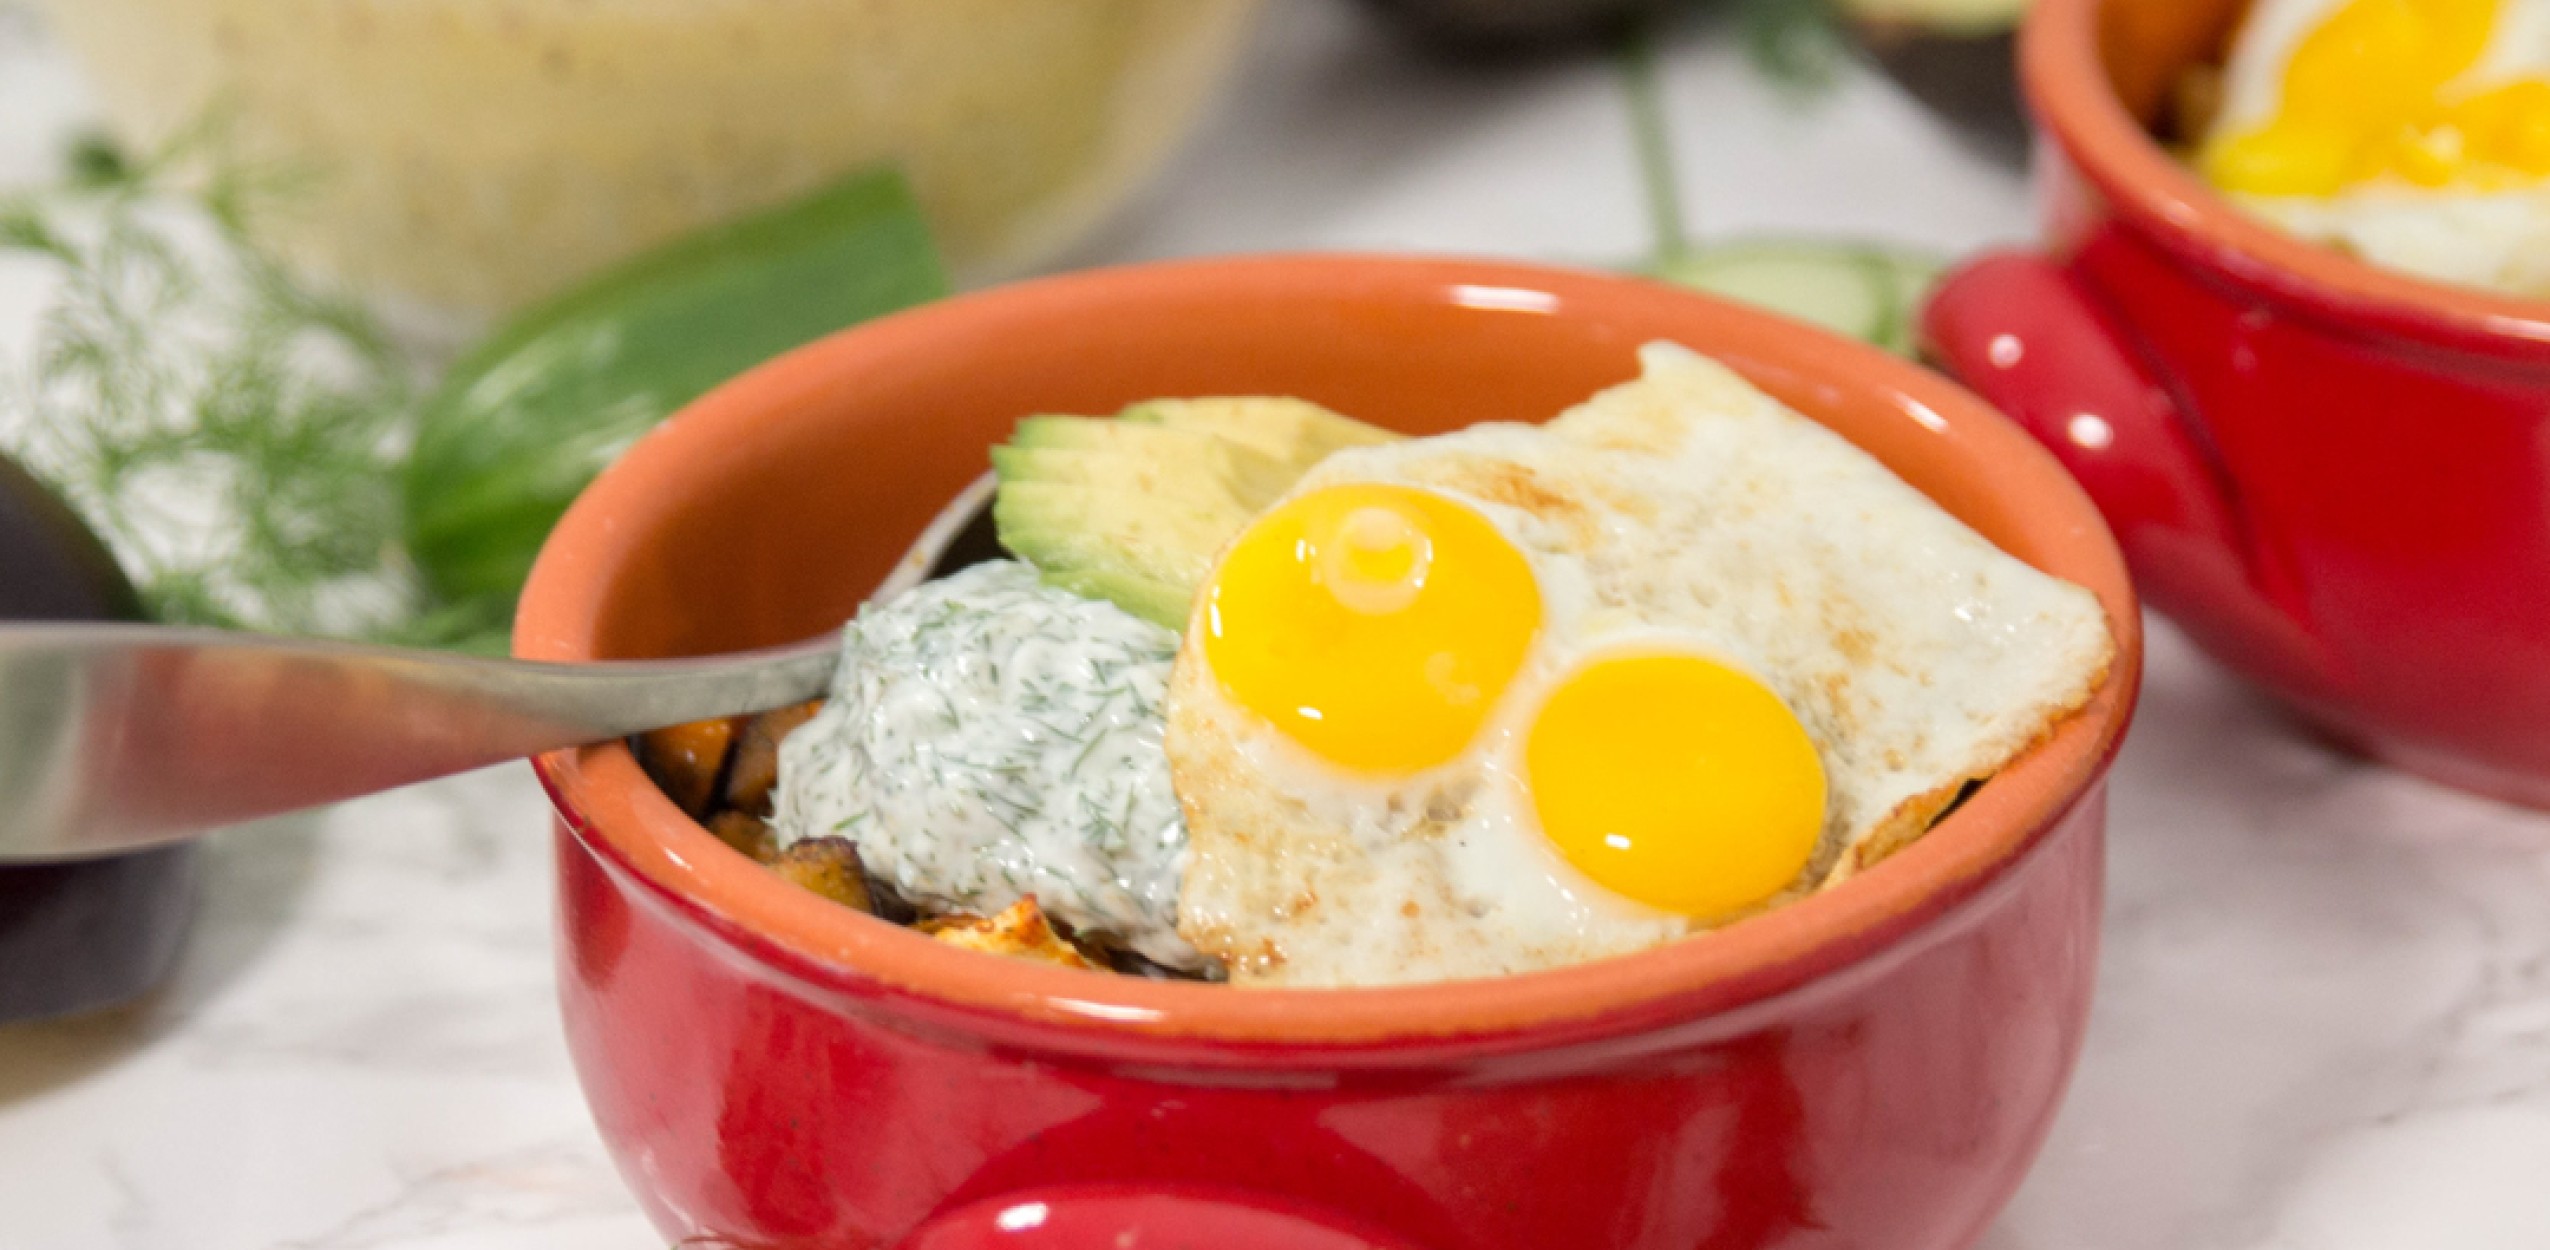 Fried quail eggs in bowl on avocado and rice